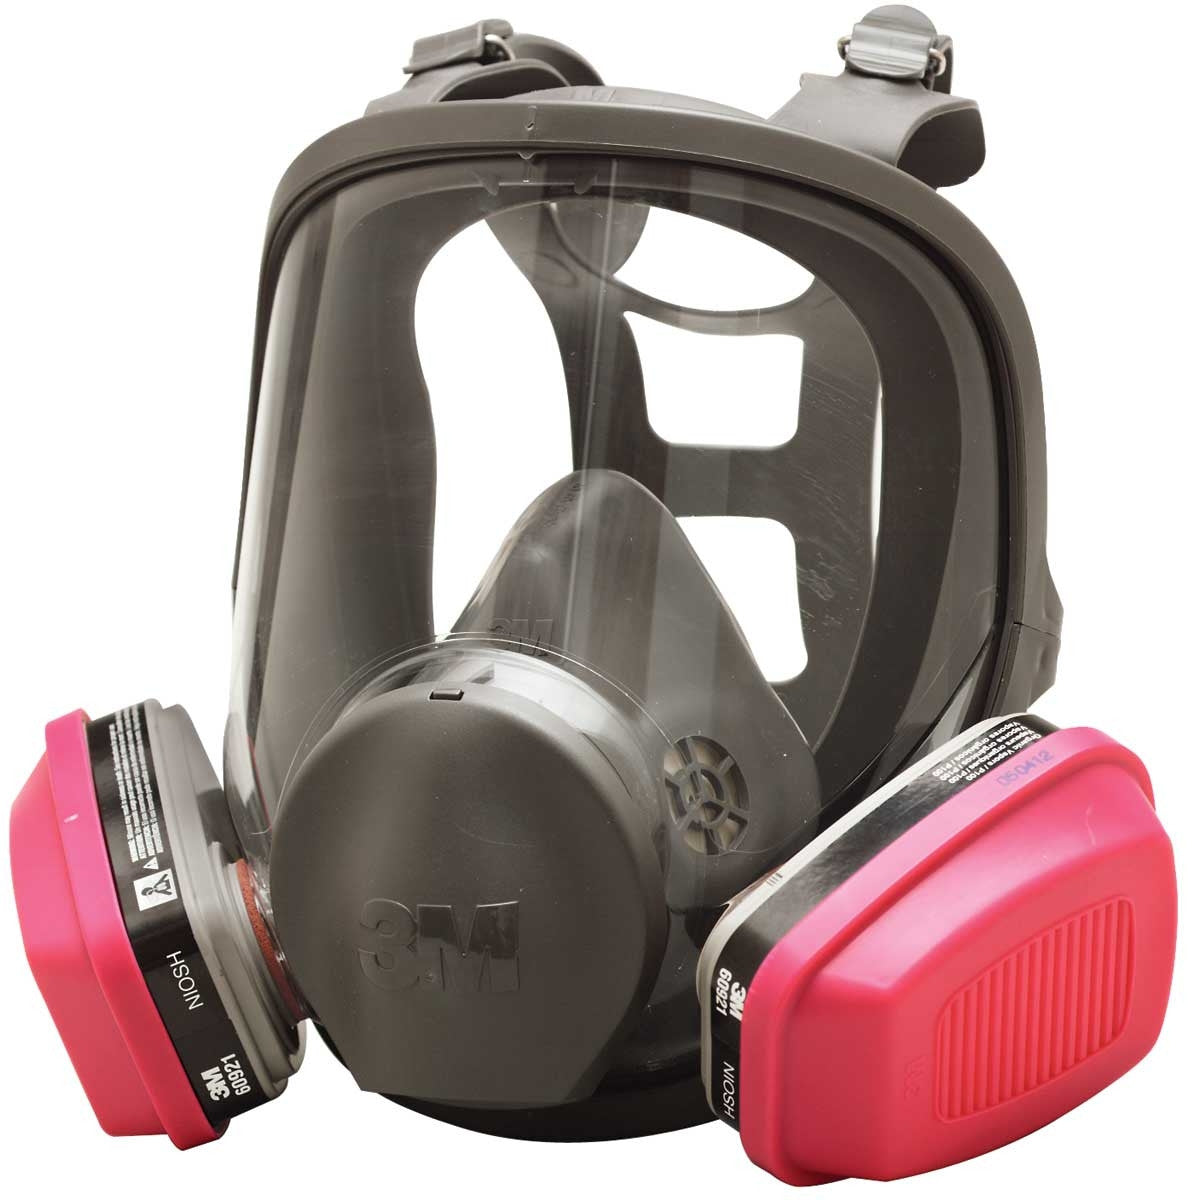 3M 6000 Series Full Face Respirator Face Mask | Small, Medium or Large Personal Protective Equipment - Cleanflow